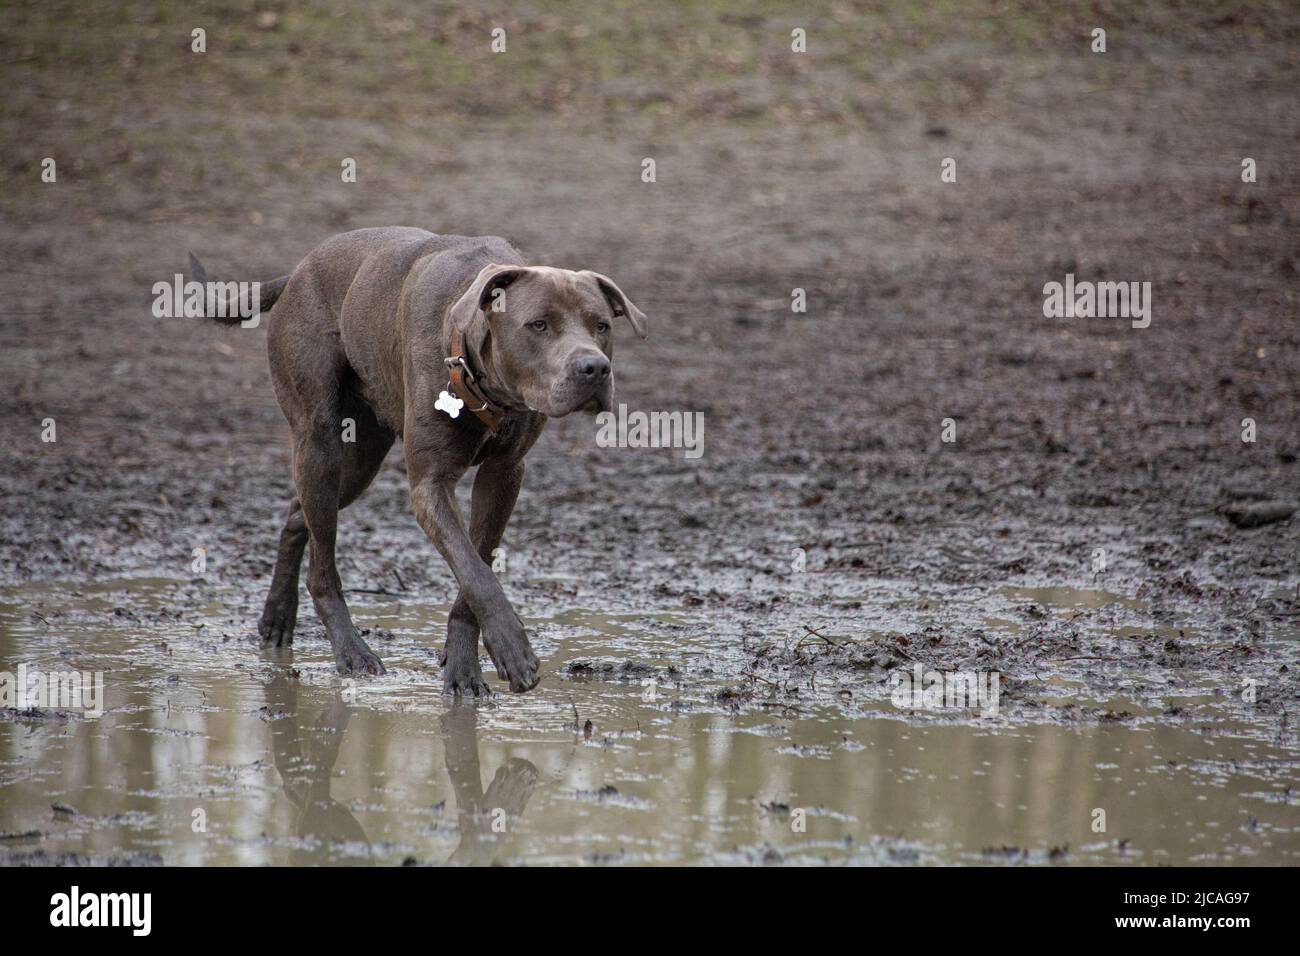 brown labrador stalking and walking in a puddle Stock Photo